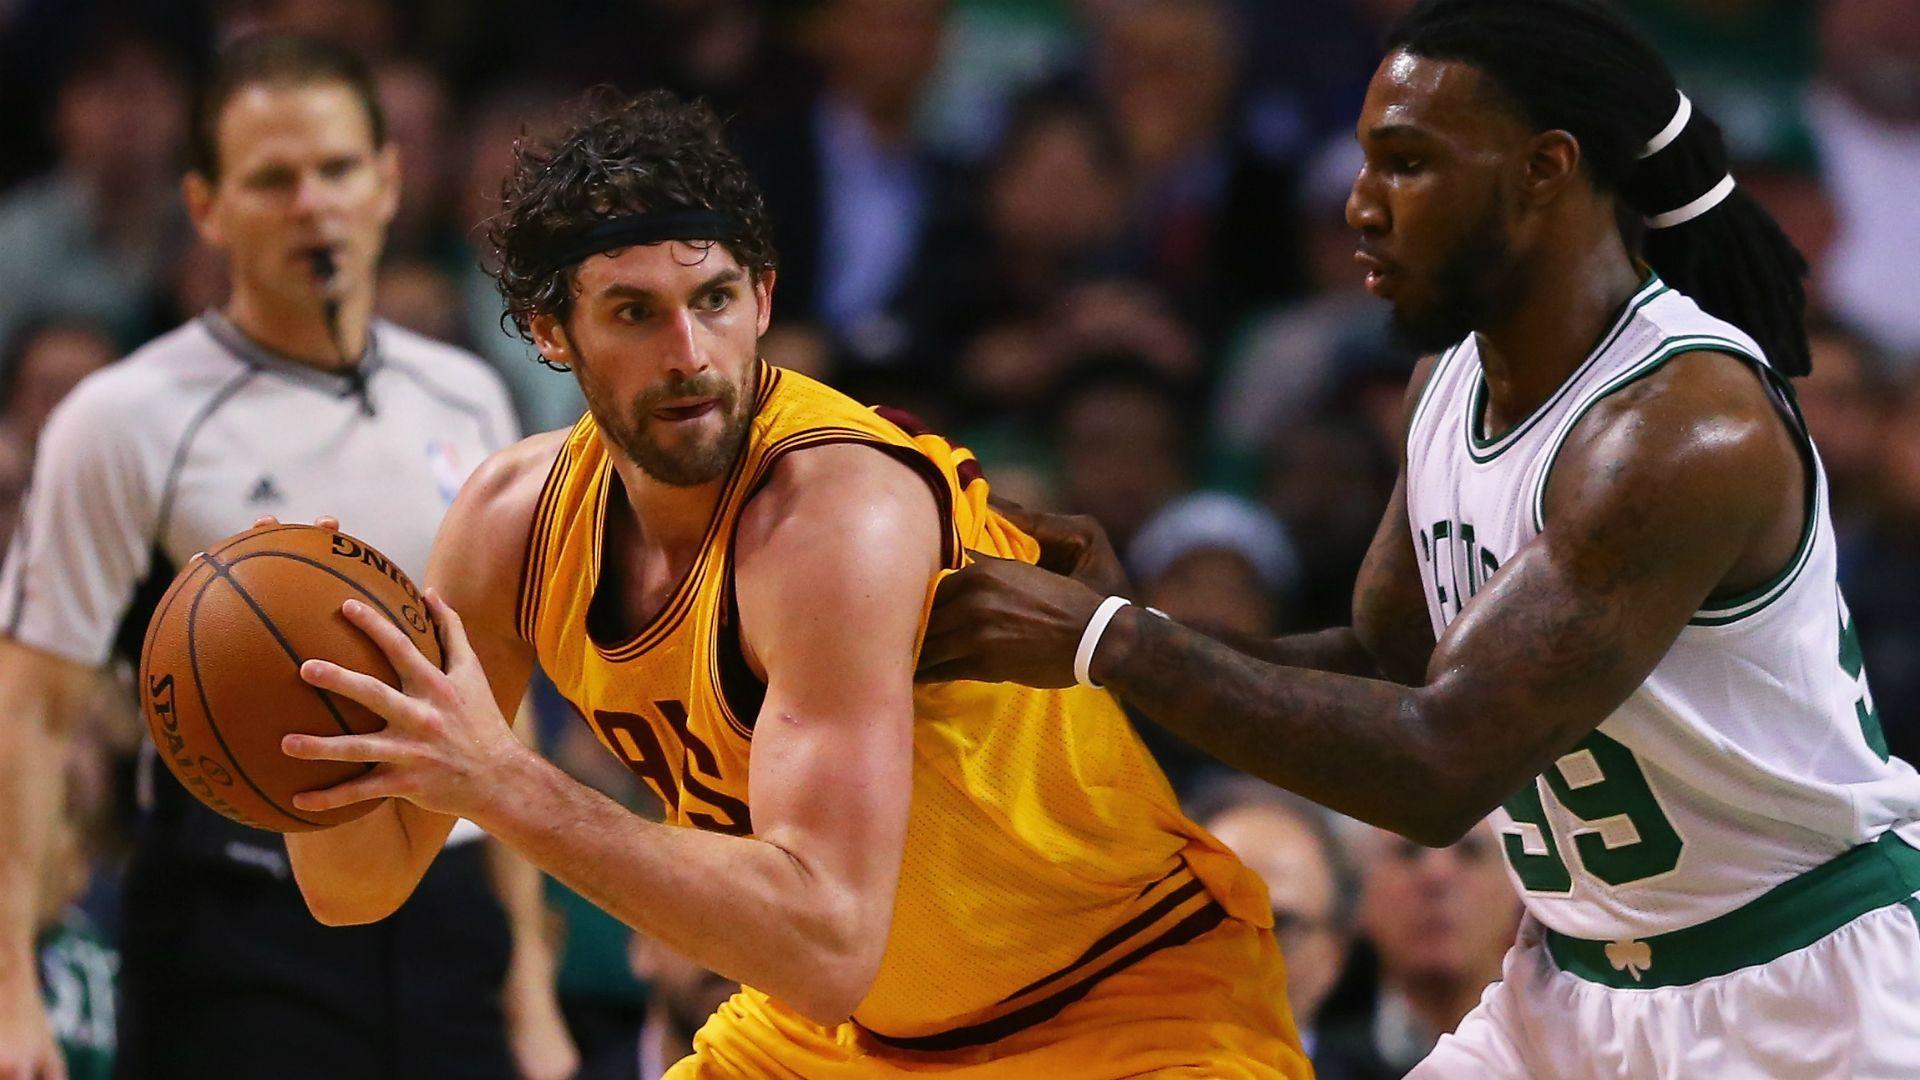 Kevin Love to the Celtics is the eternal (and valid) NBA trade